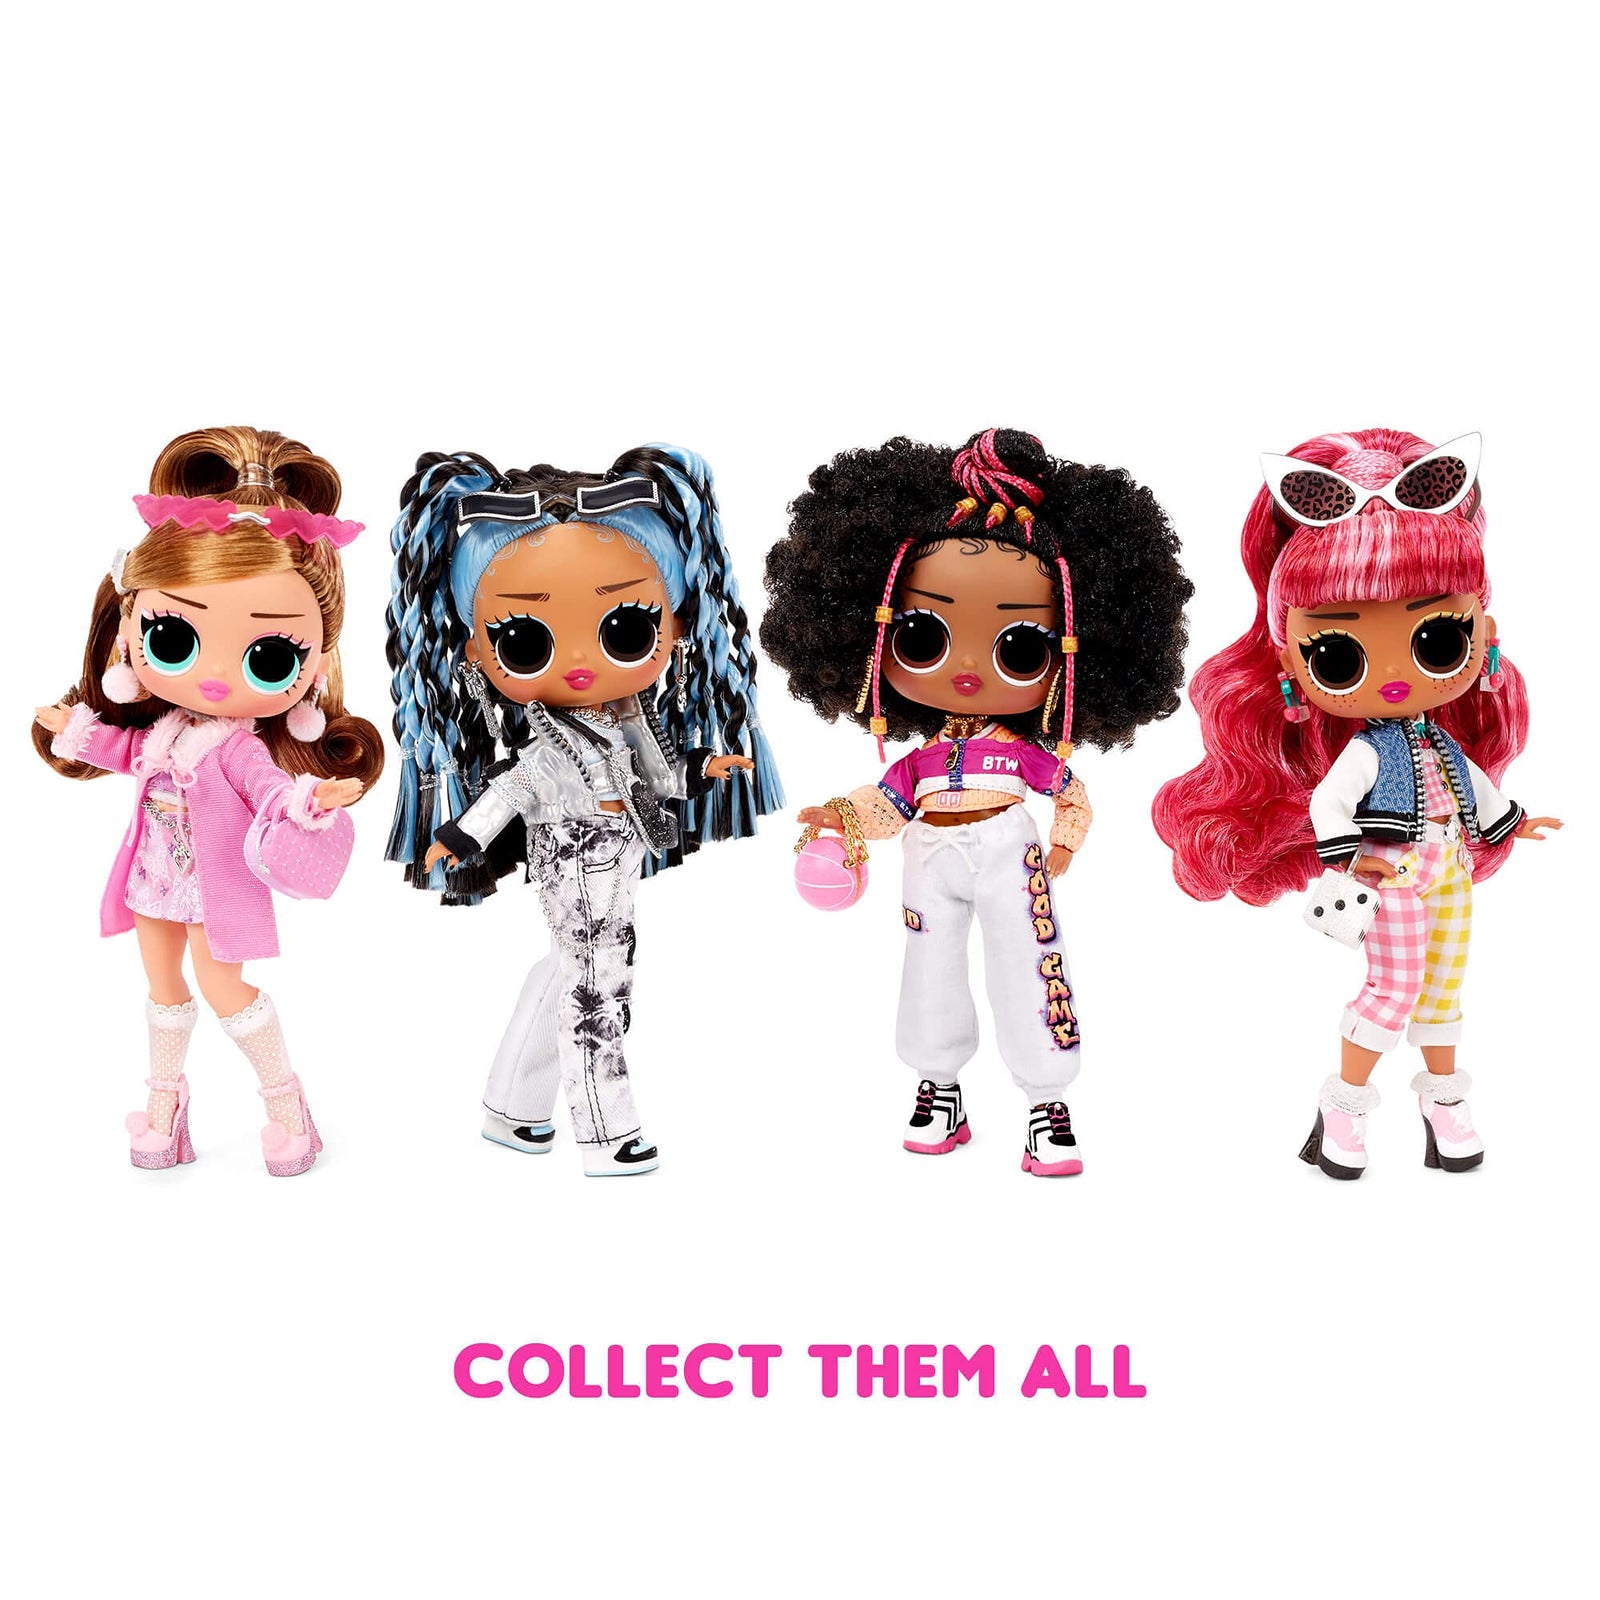 LOL Surprise Tweens Fashion Doll Fancy Gurl with 15 Surprises Including Pink Outfit and Accessories for Fashion Toy Girls Ages 3 and up